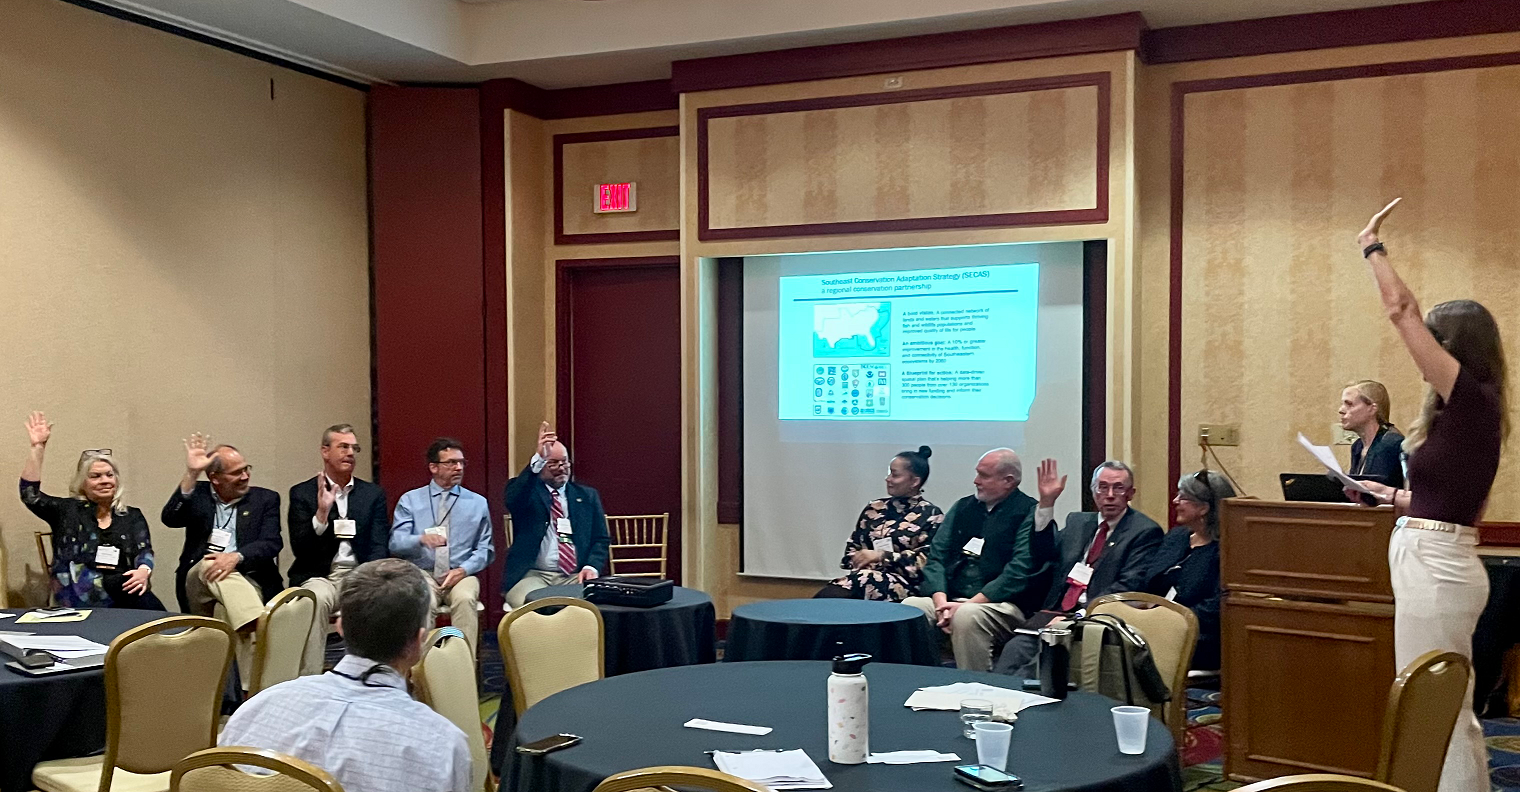 Photo from the SECAS symposium at the 2022 SEAFWA annual conference showing 9 members of SECAS executive-level leadership seated at the front of the room, engaged in a panel discussion.